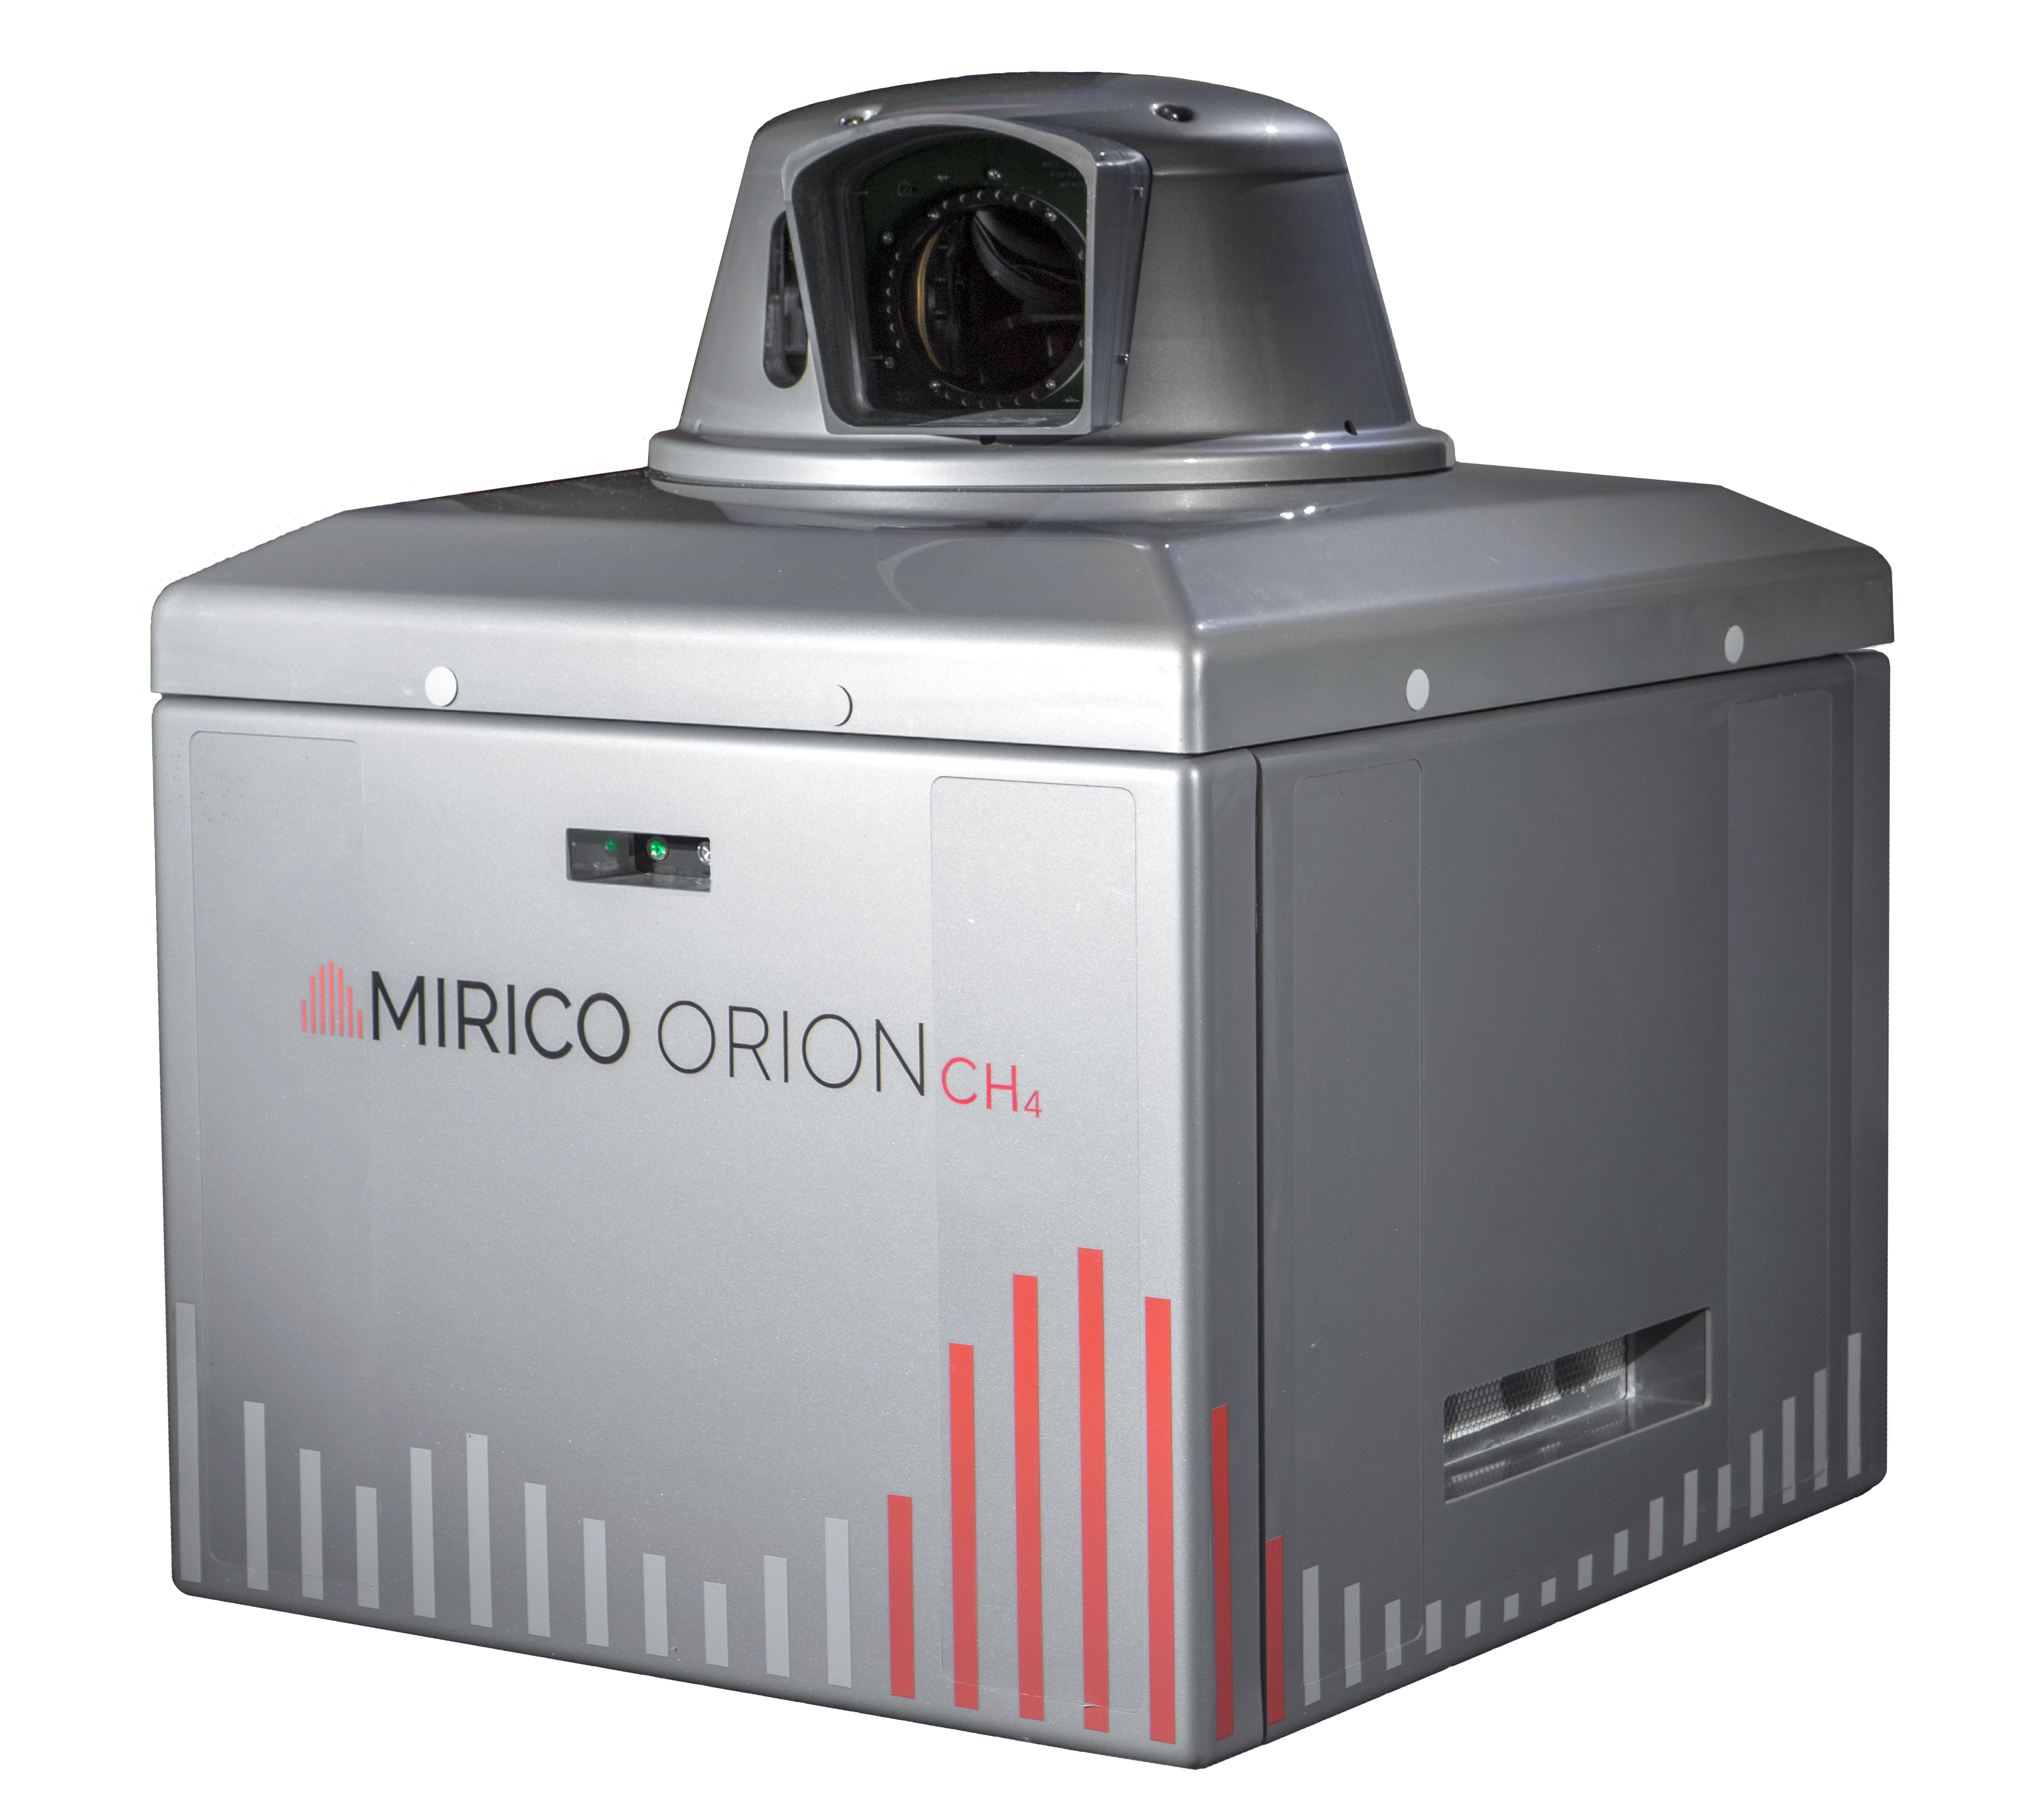 MIRICO ORION product image